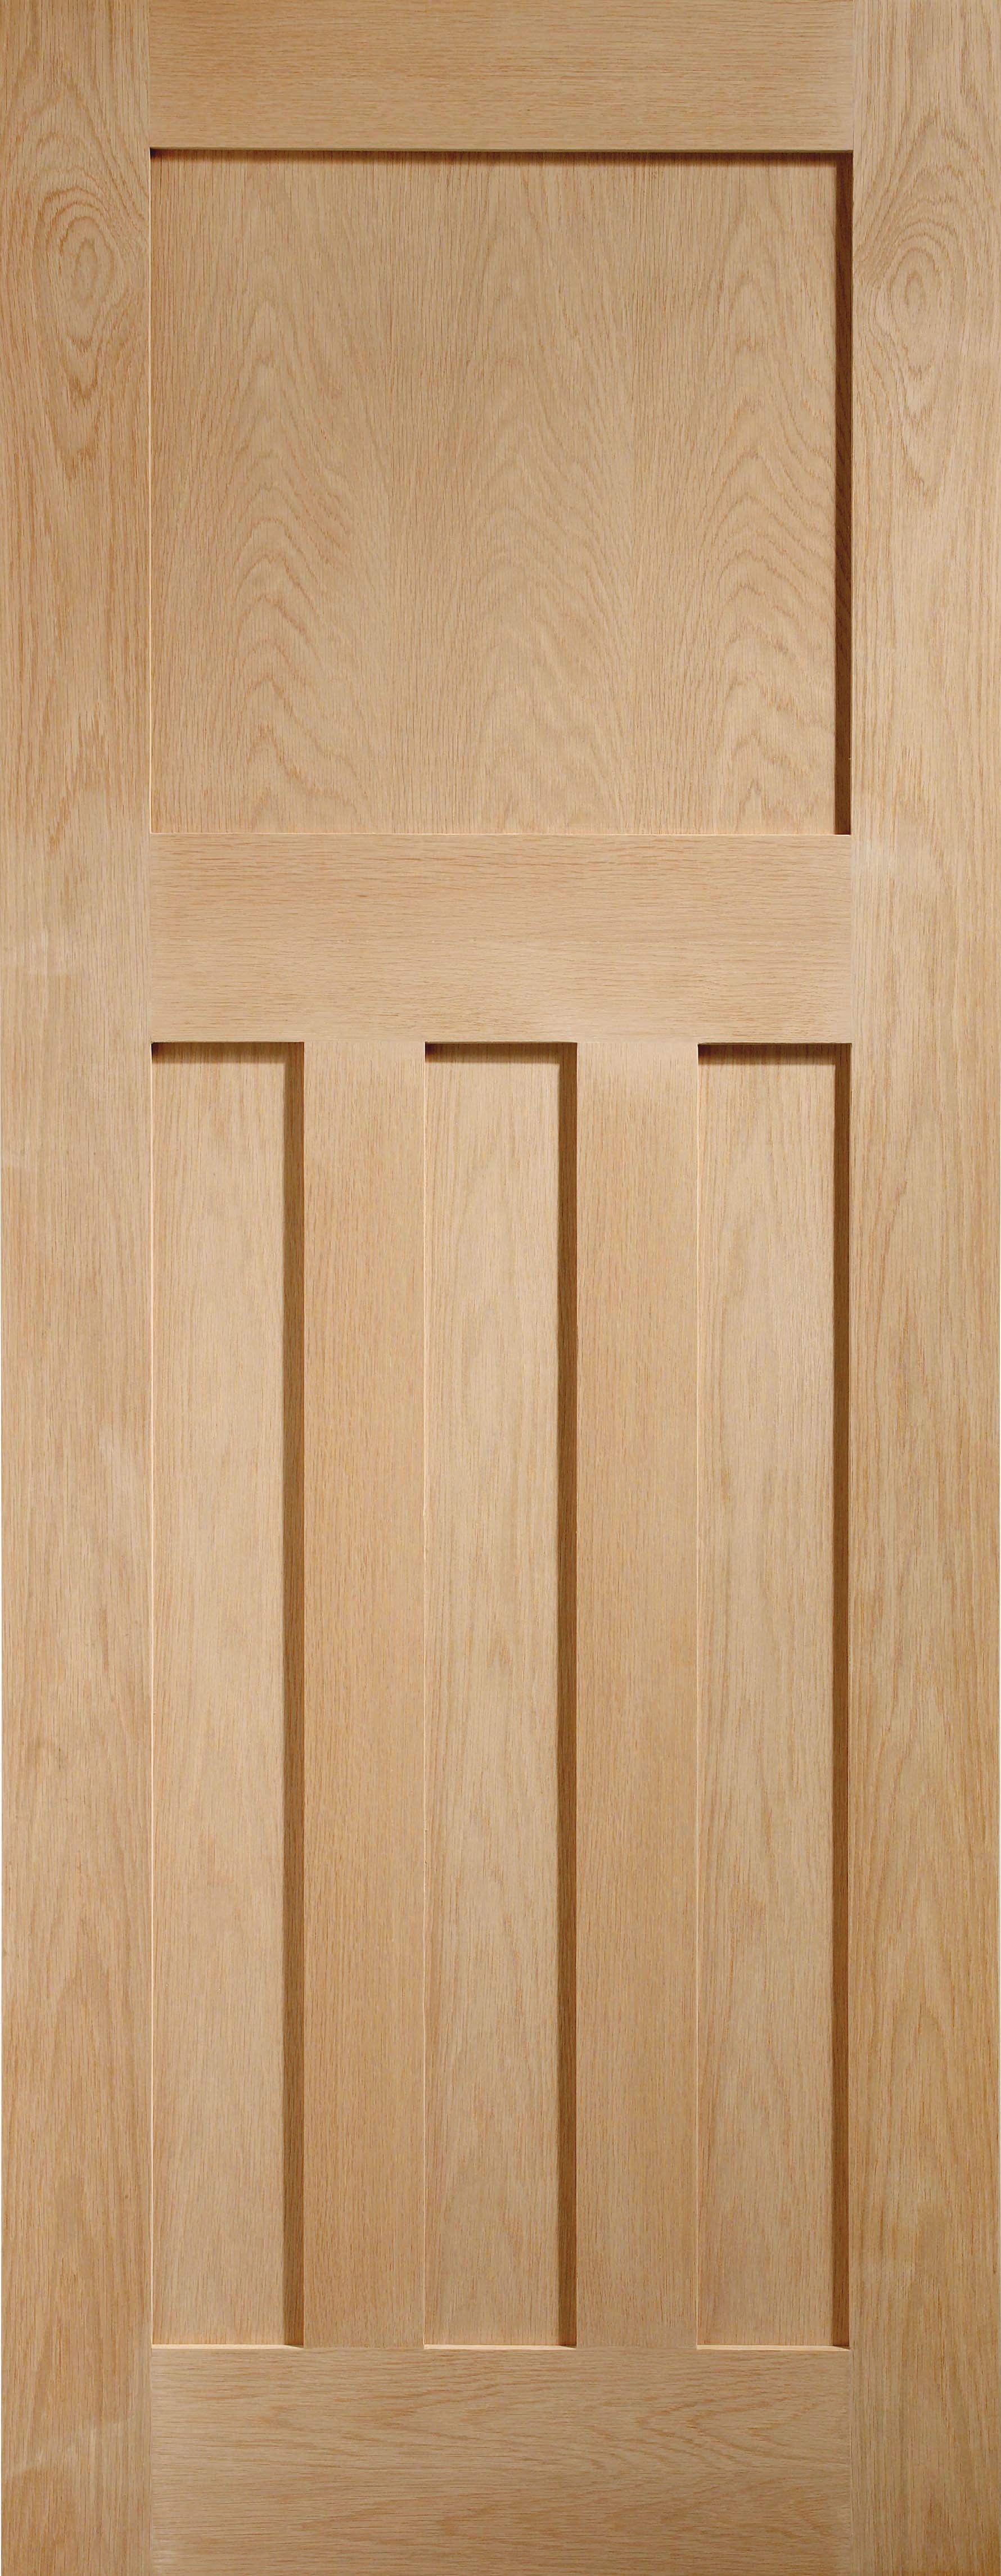 Image of XL Joinery DX 1930s Classic Oak Pre Finished Internal Door - 1981 x 762mm